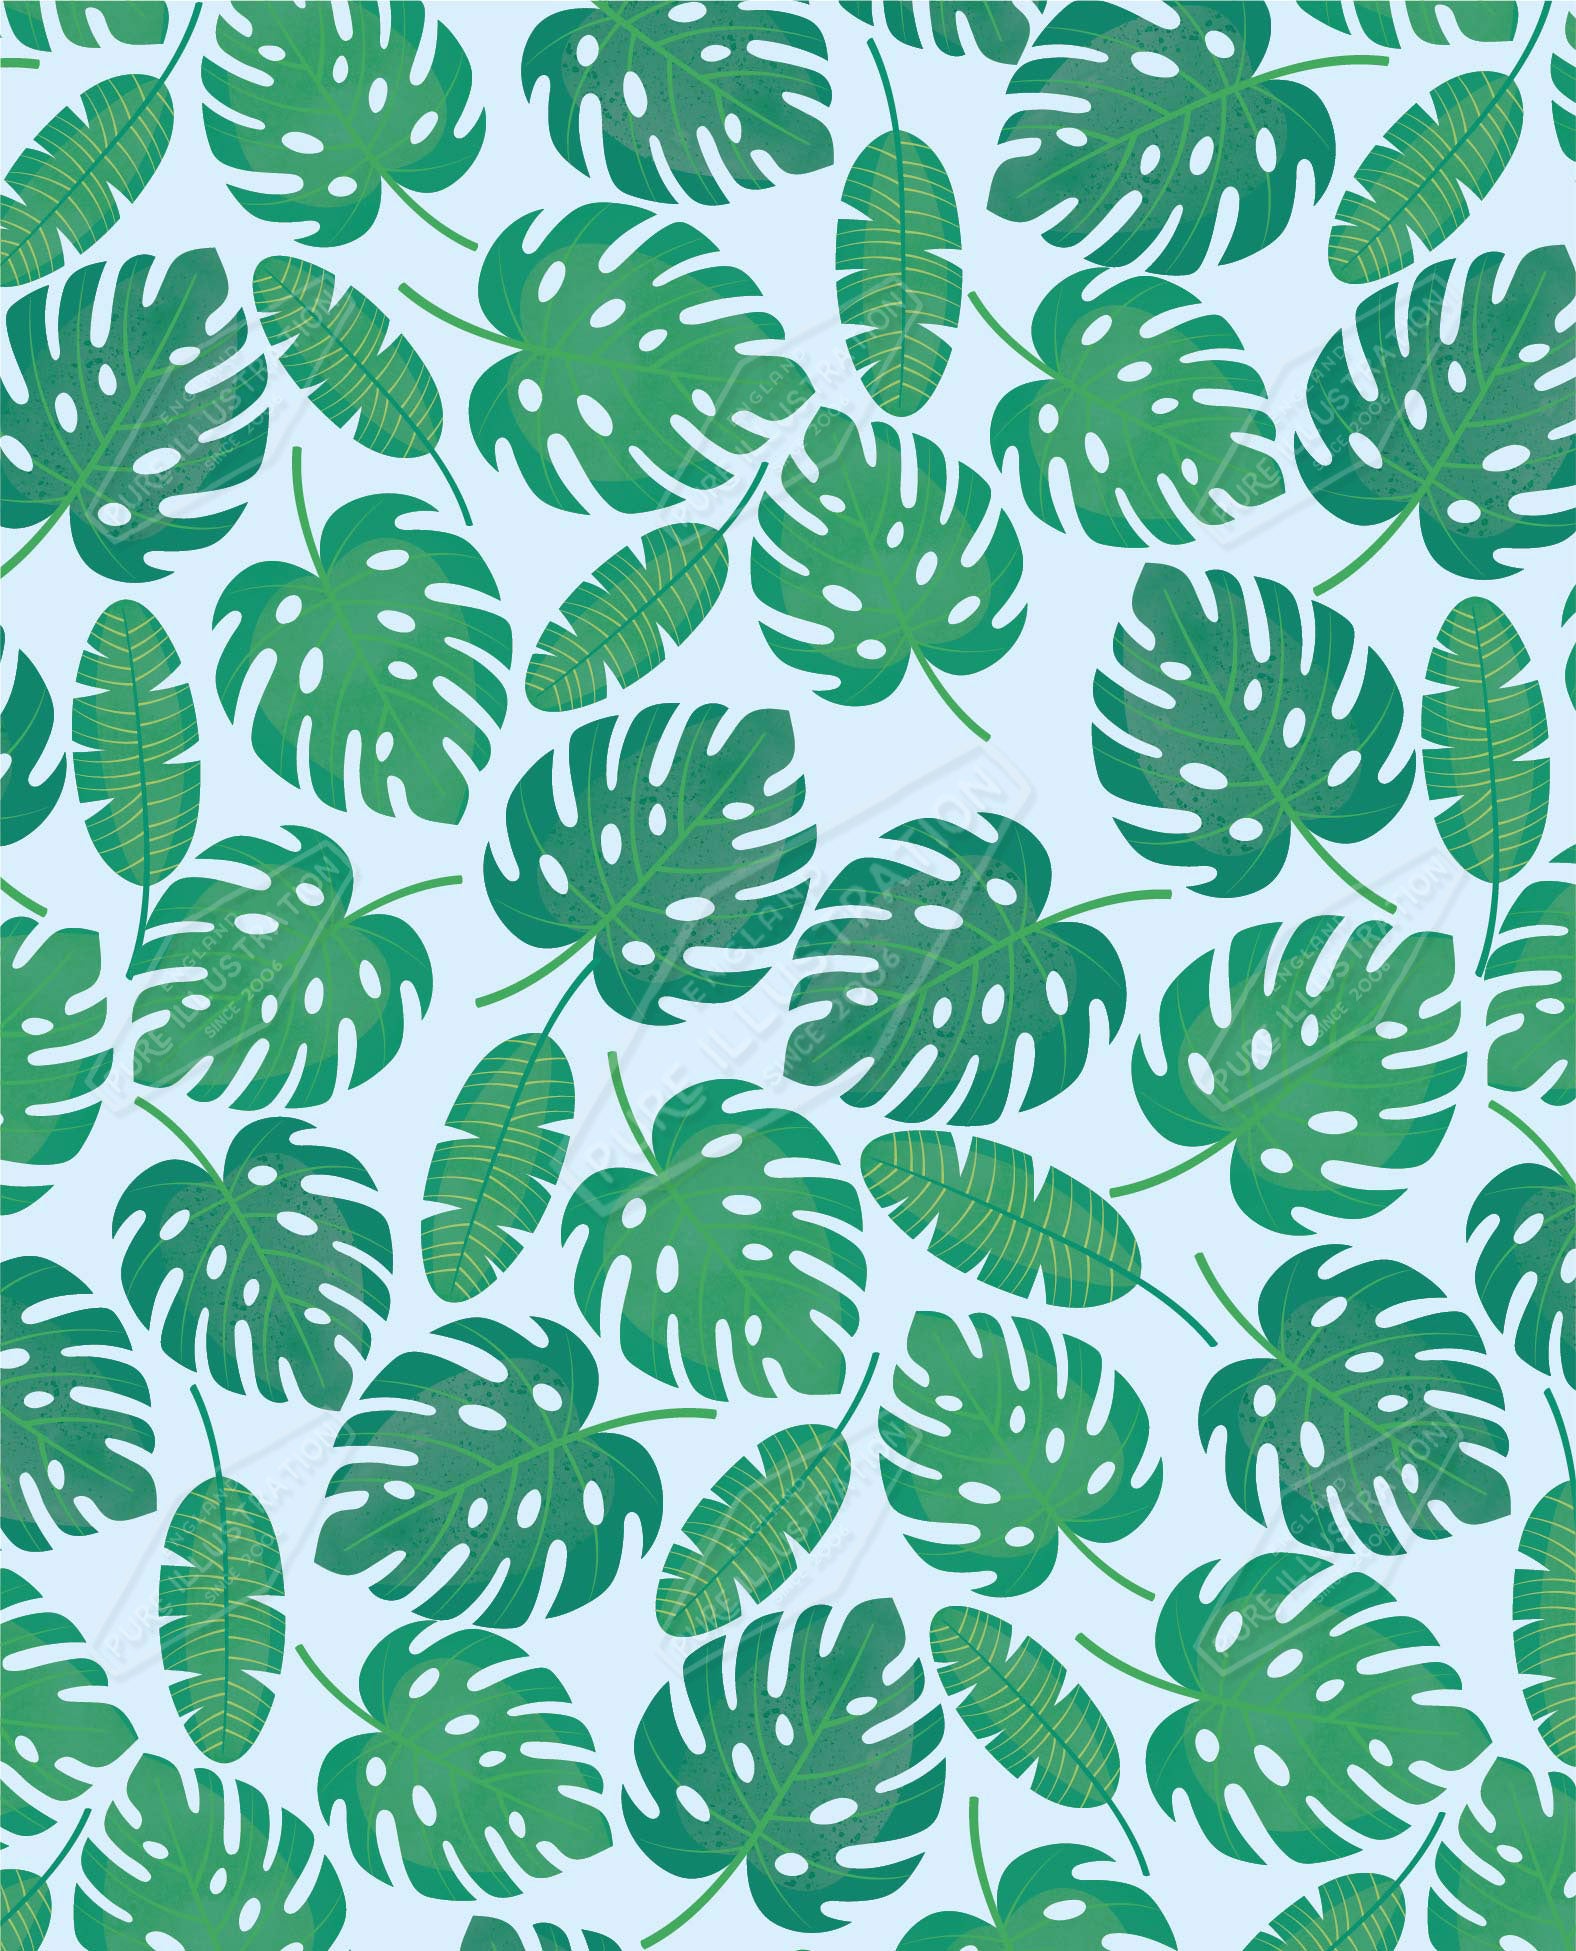 00035120SPI- Sarah Pitt is represented by Pure Art Licensing Agency - Everyday Pattern Design